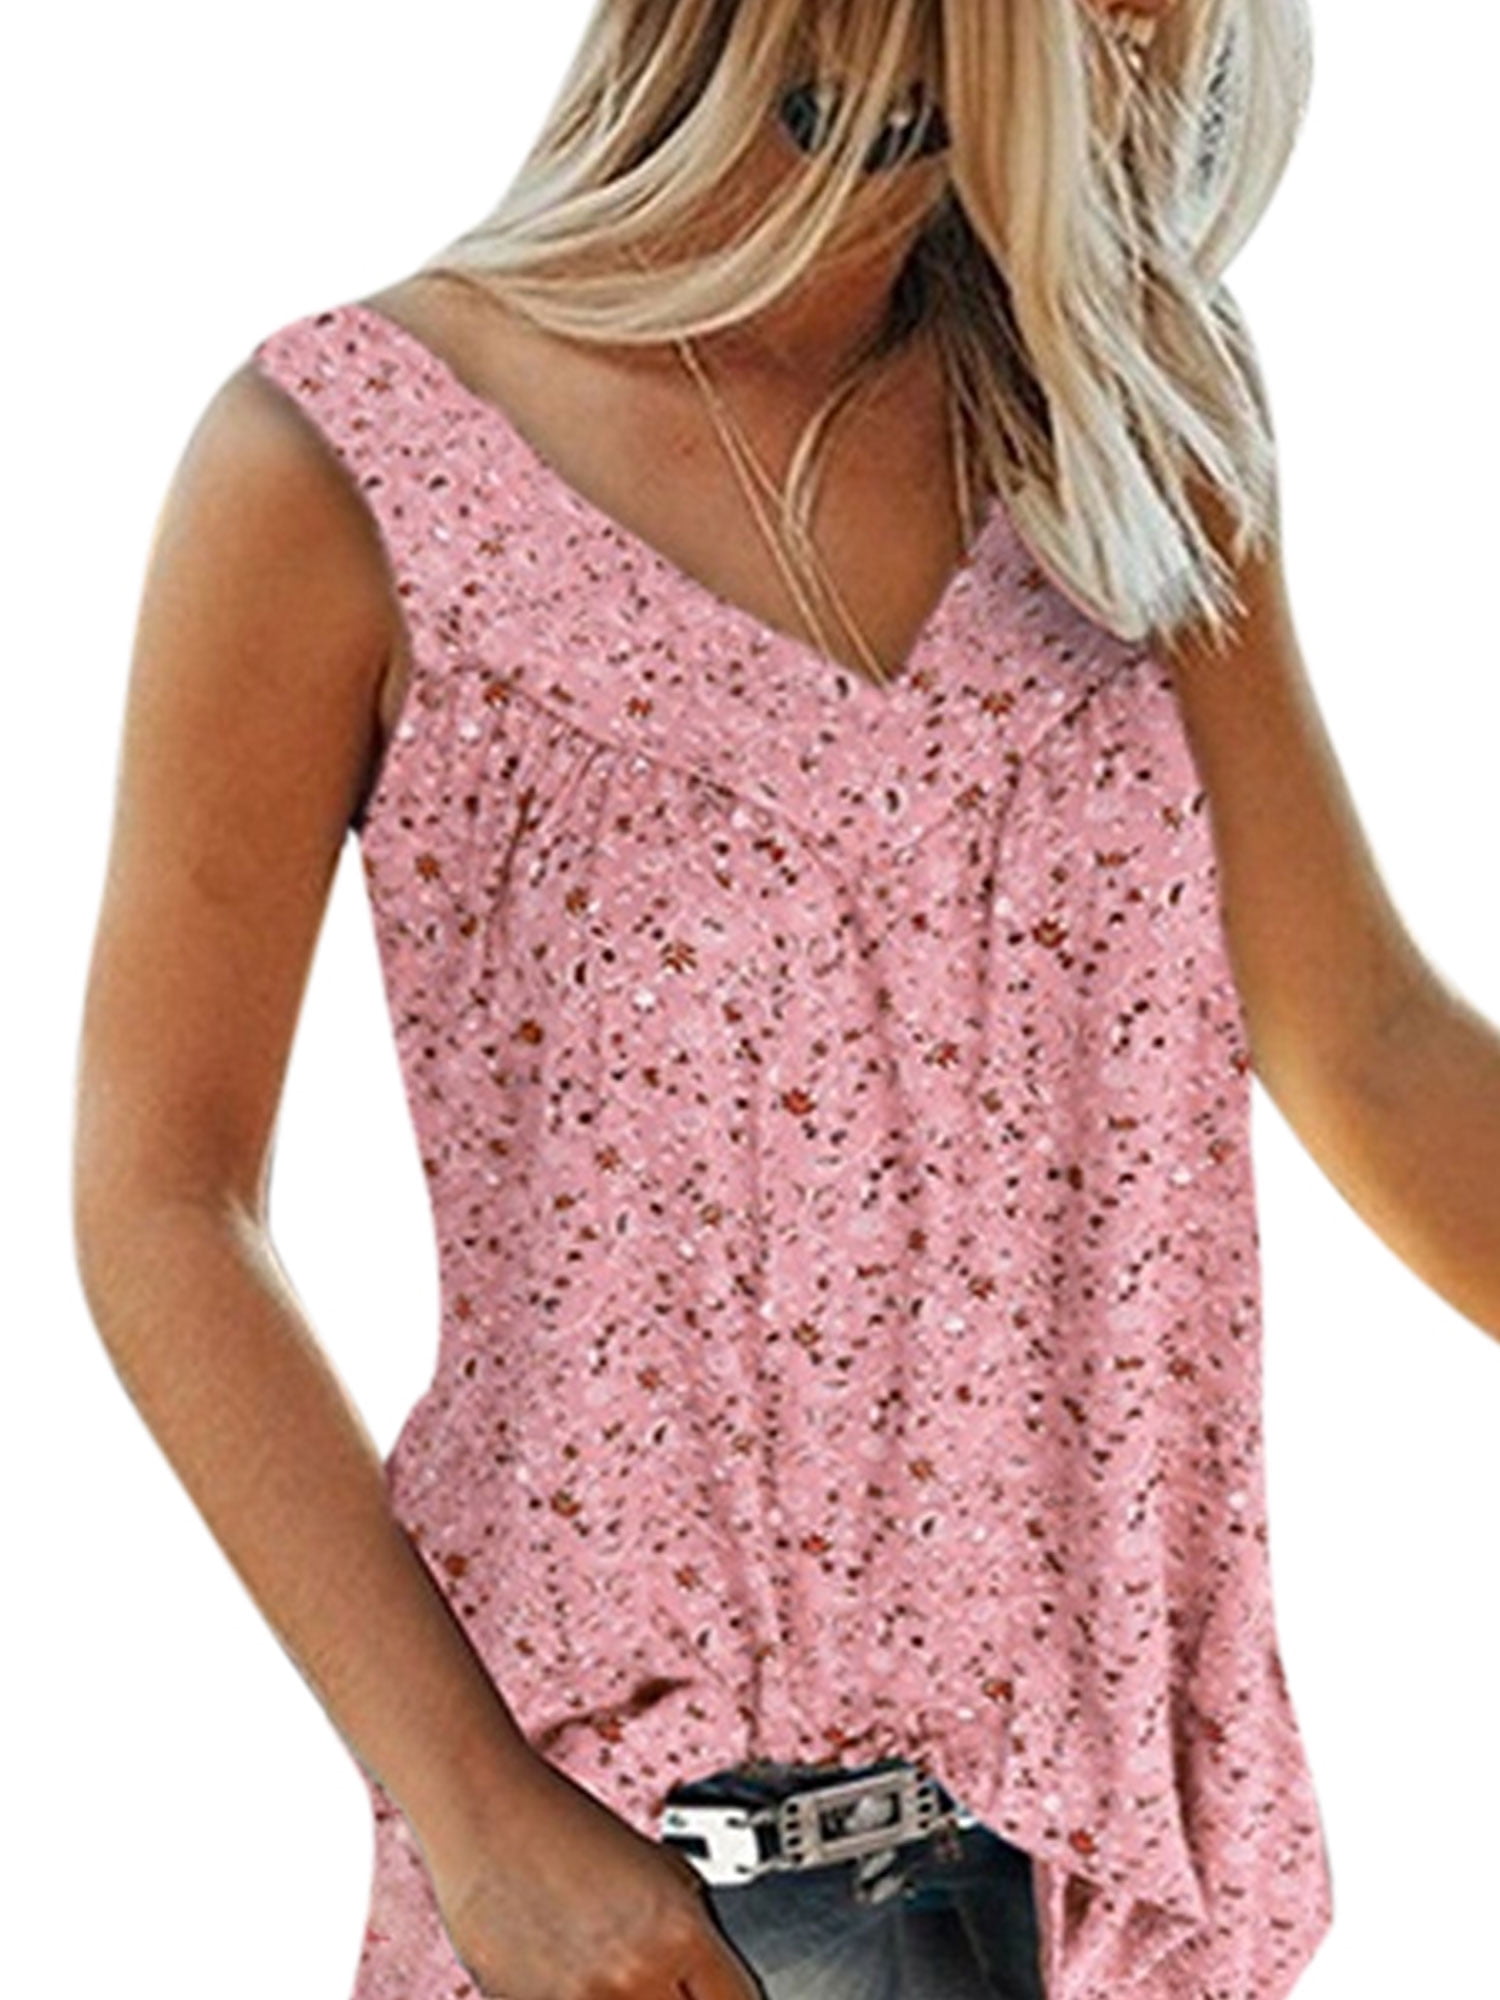 aihihe Strappy Tank Tops for Women Plus Size Floral Print Casual Summer Loose Sleeveless T Shirts Blouses Tunics 